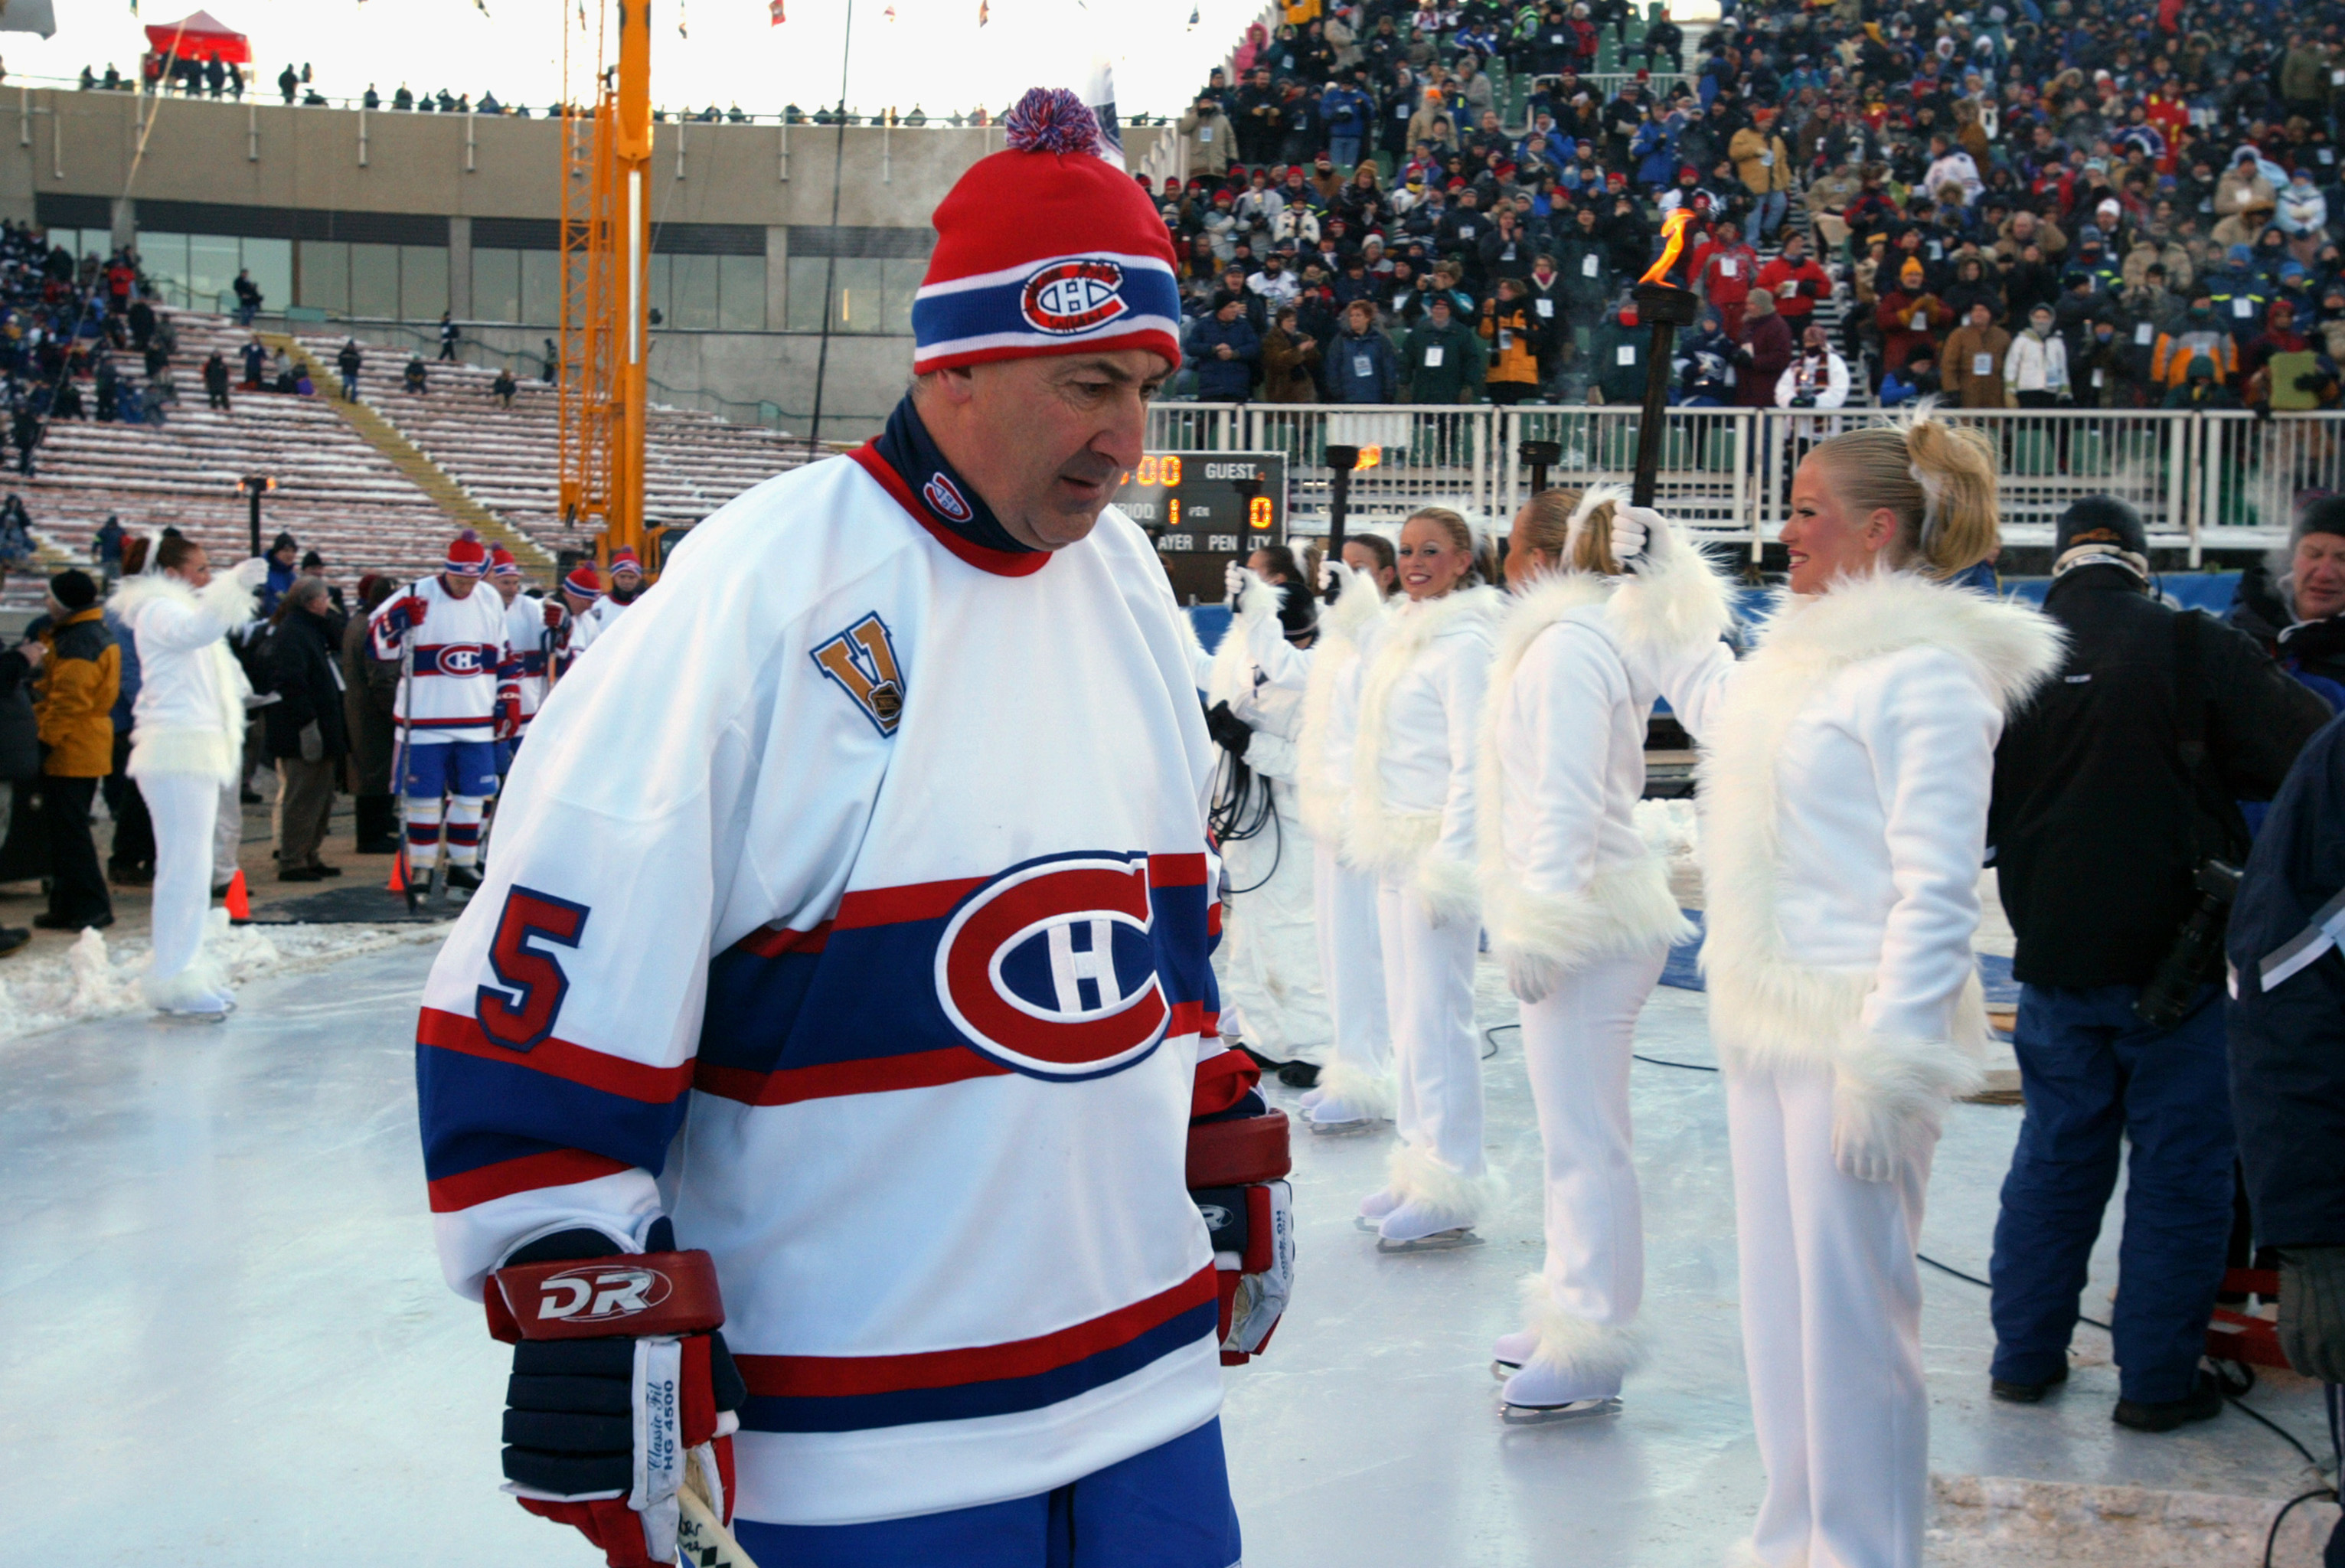 EDMONTON, CANADA - NOVEMBER 22:  Guy Lapointe #5 of the Montreal Canadiens skates onto the ice prior to taking on the Edmonton Oilers during the Molson Canadien Heritage Classic Megastars Game on November 22, 2003 at Commonwealth Stadium in Edmonton, Cana